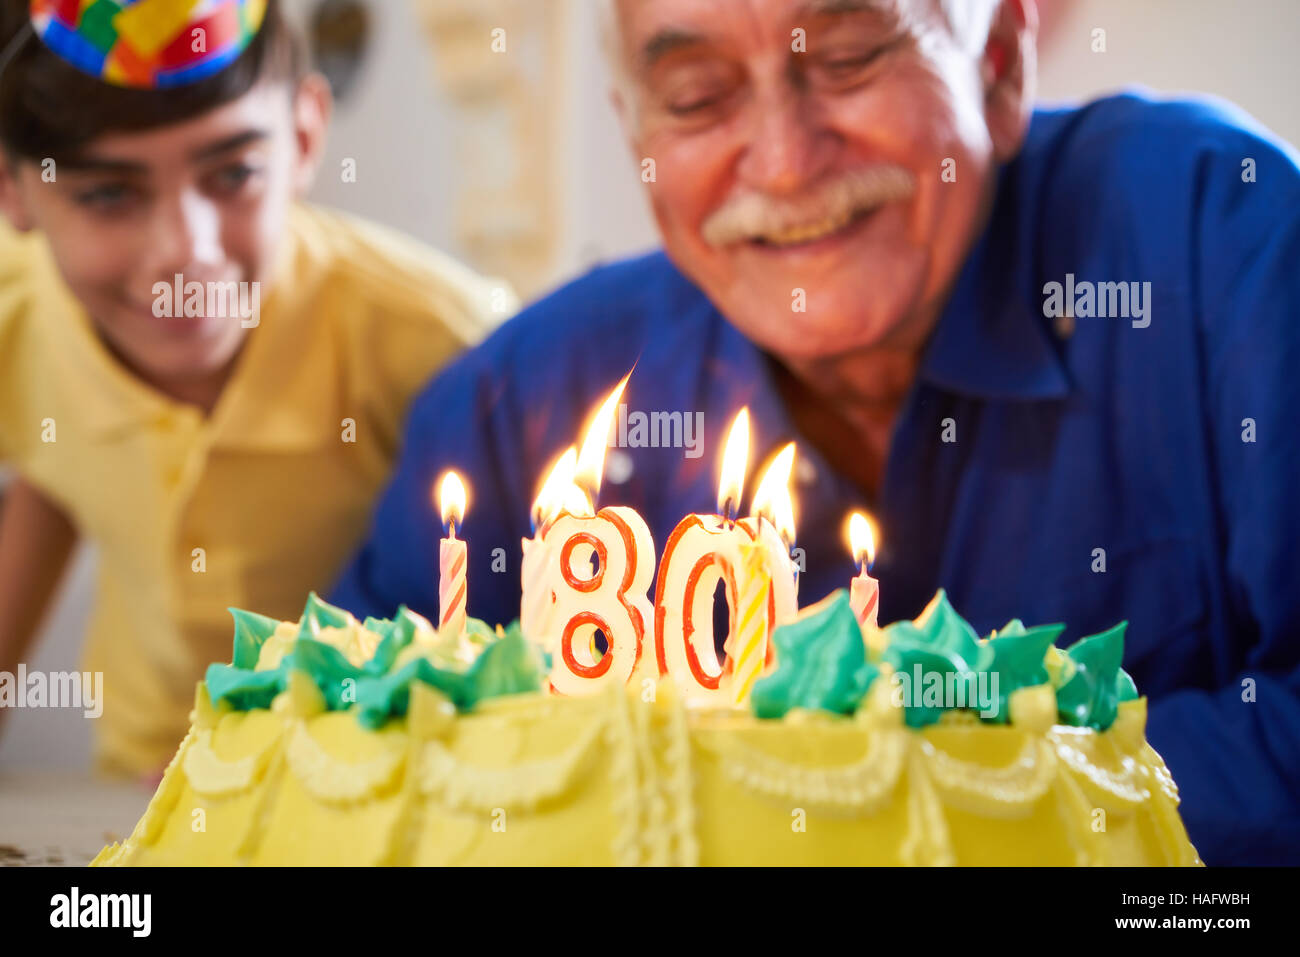 Grandson and family celebrating senior man eighty birthday. Grandfather blowing candles with number 80 on cake and smiling. Stock Photo